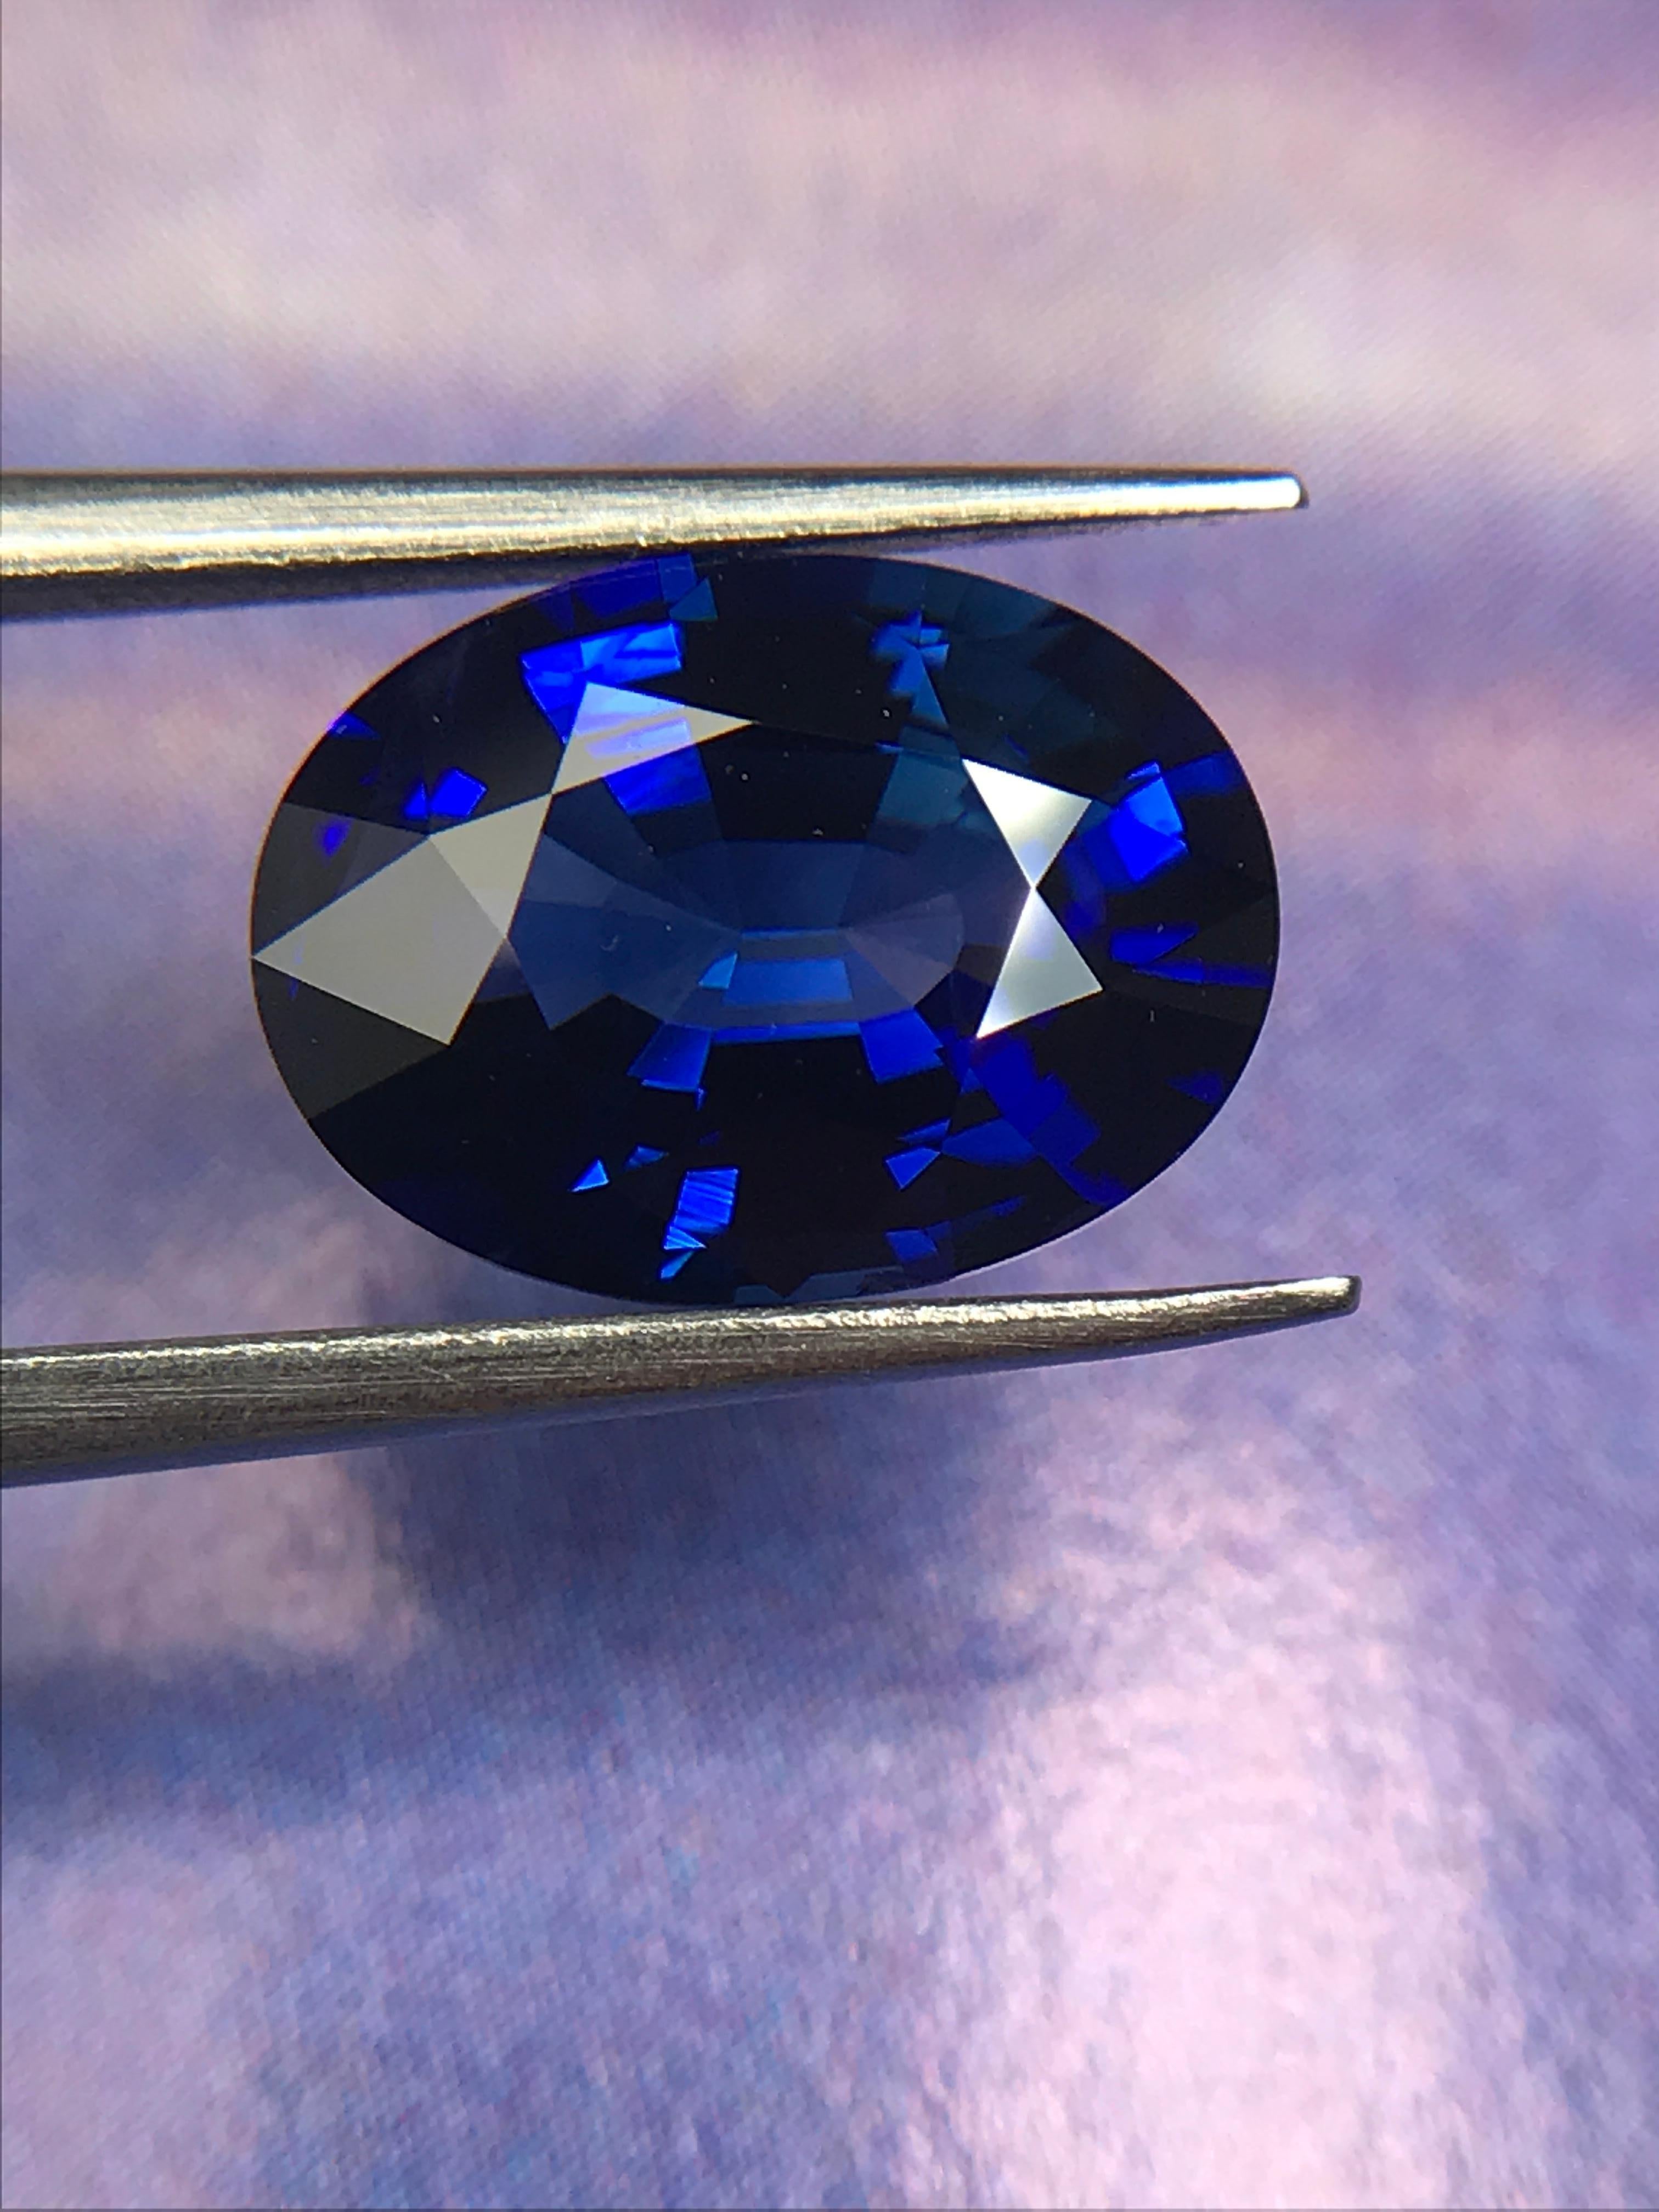 Dazzling 3.80 carat natural oval sapphire in rich royal blue colour perfect for a timeless jewellery piece. 

We specialise in colour gemstones and offer a bespoke jewellery service. The production time for bespoke pieces is usually 4-8 weeks from